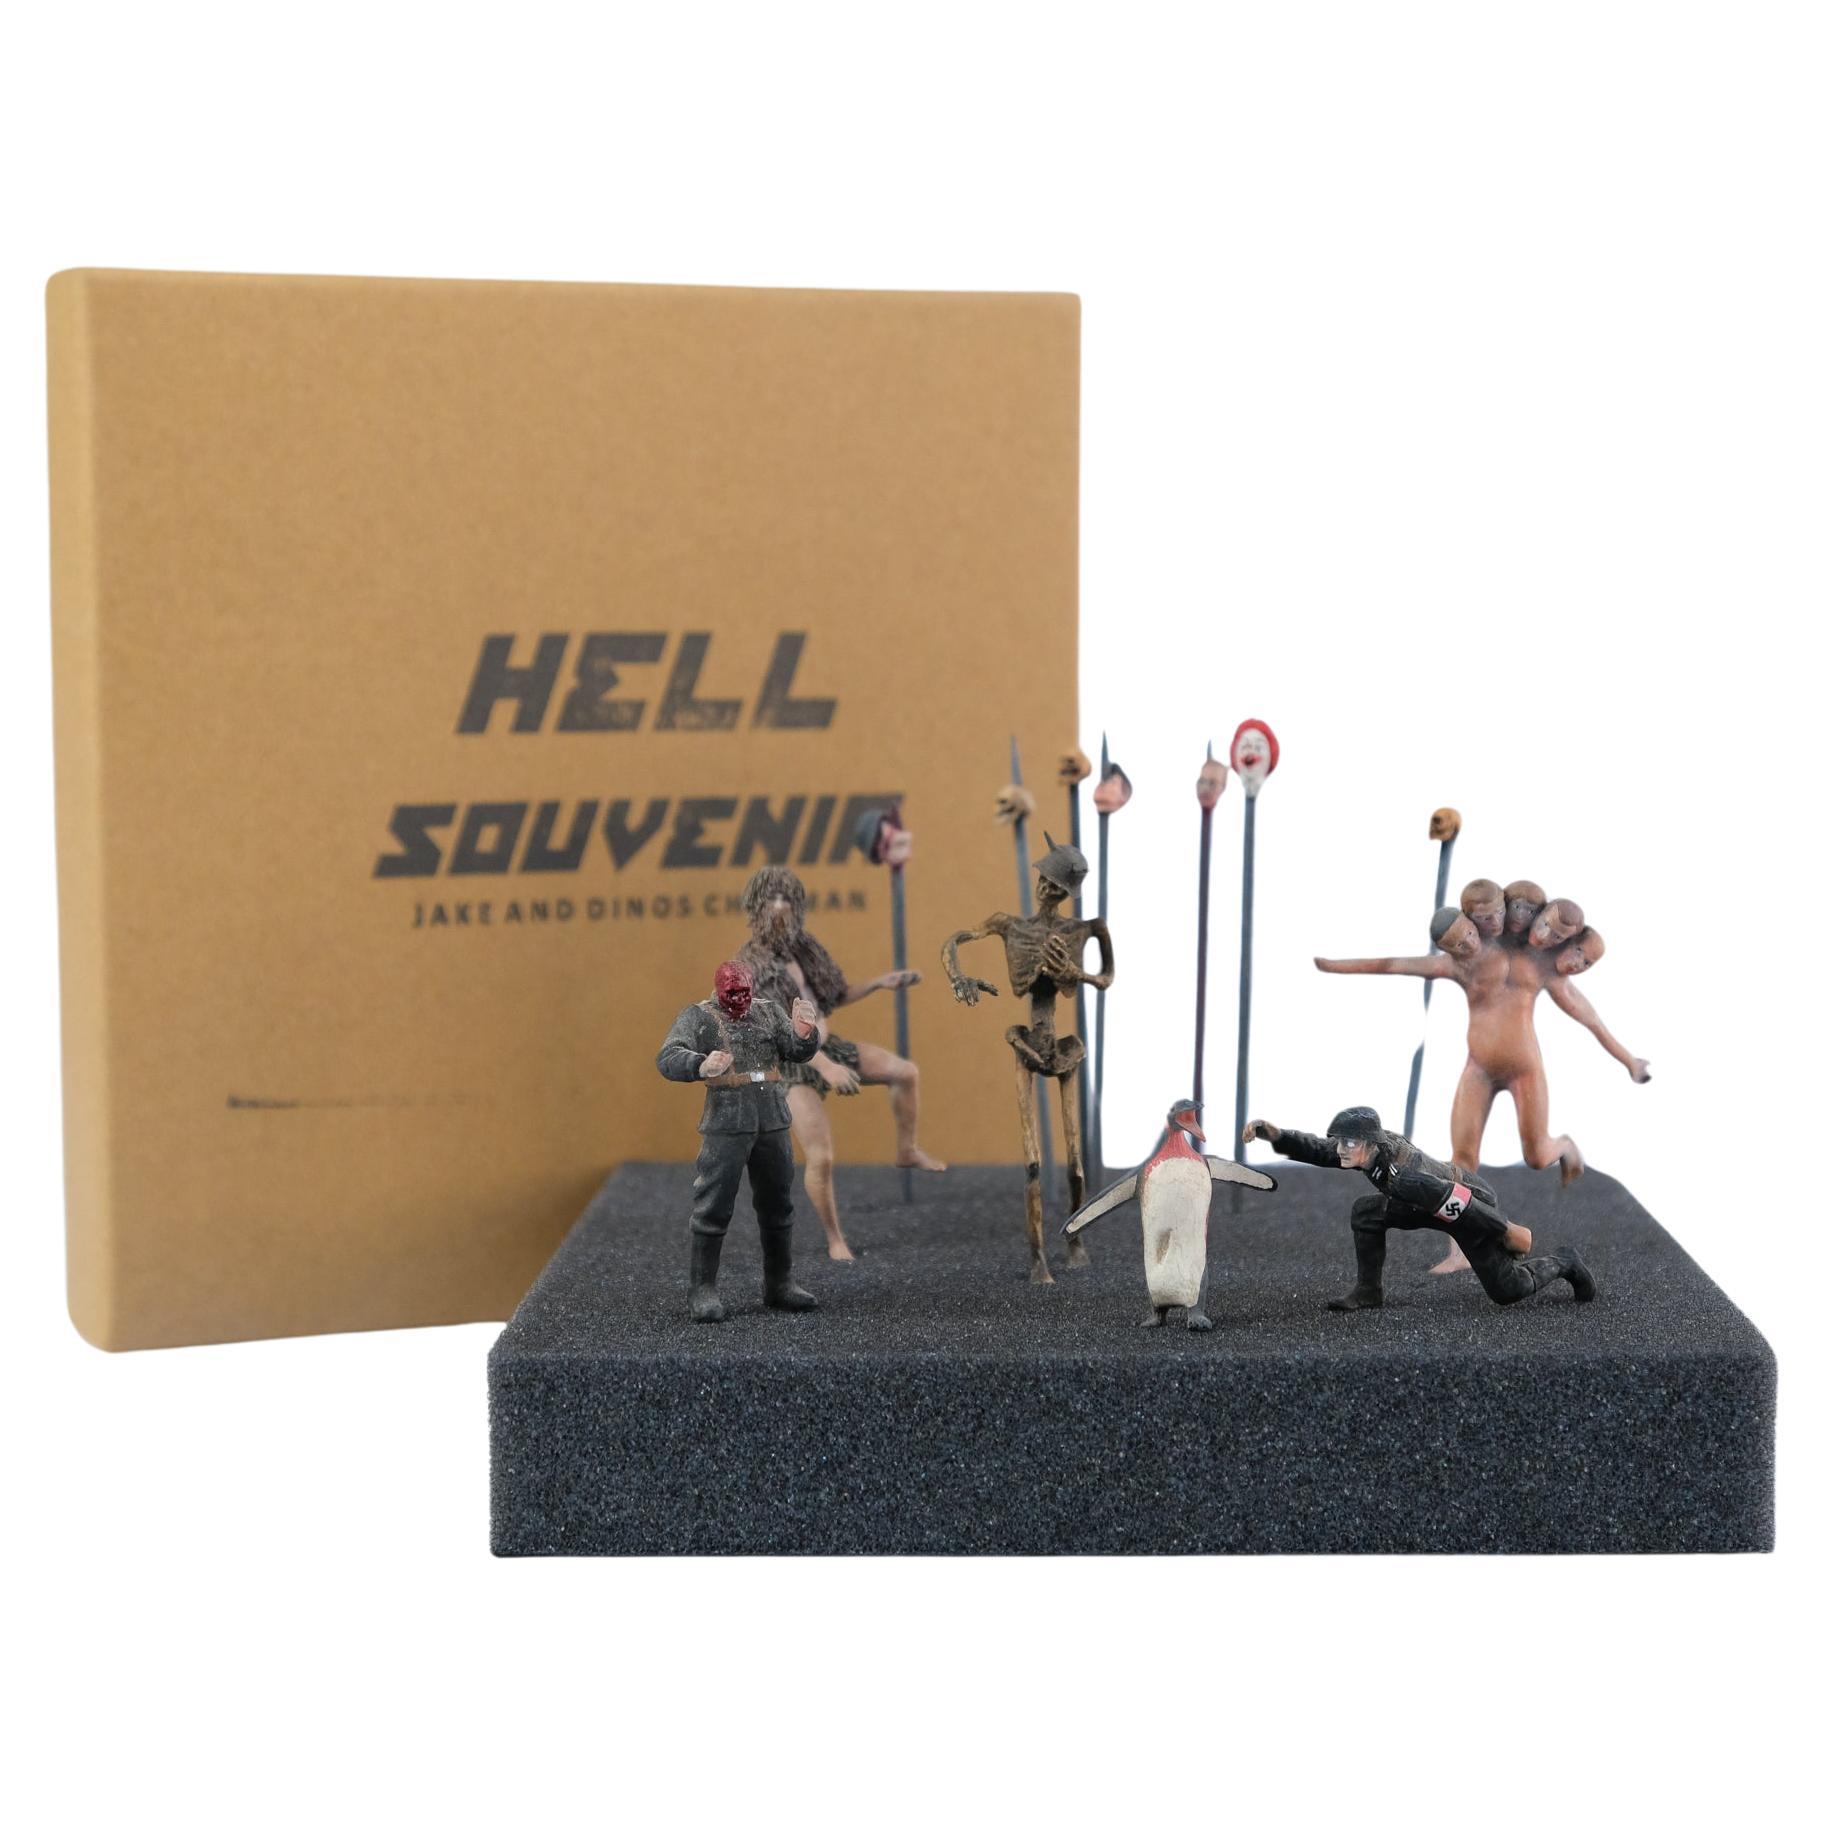 'Hell Souvenir' figures By Jake and Dinos Chapman, 2022